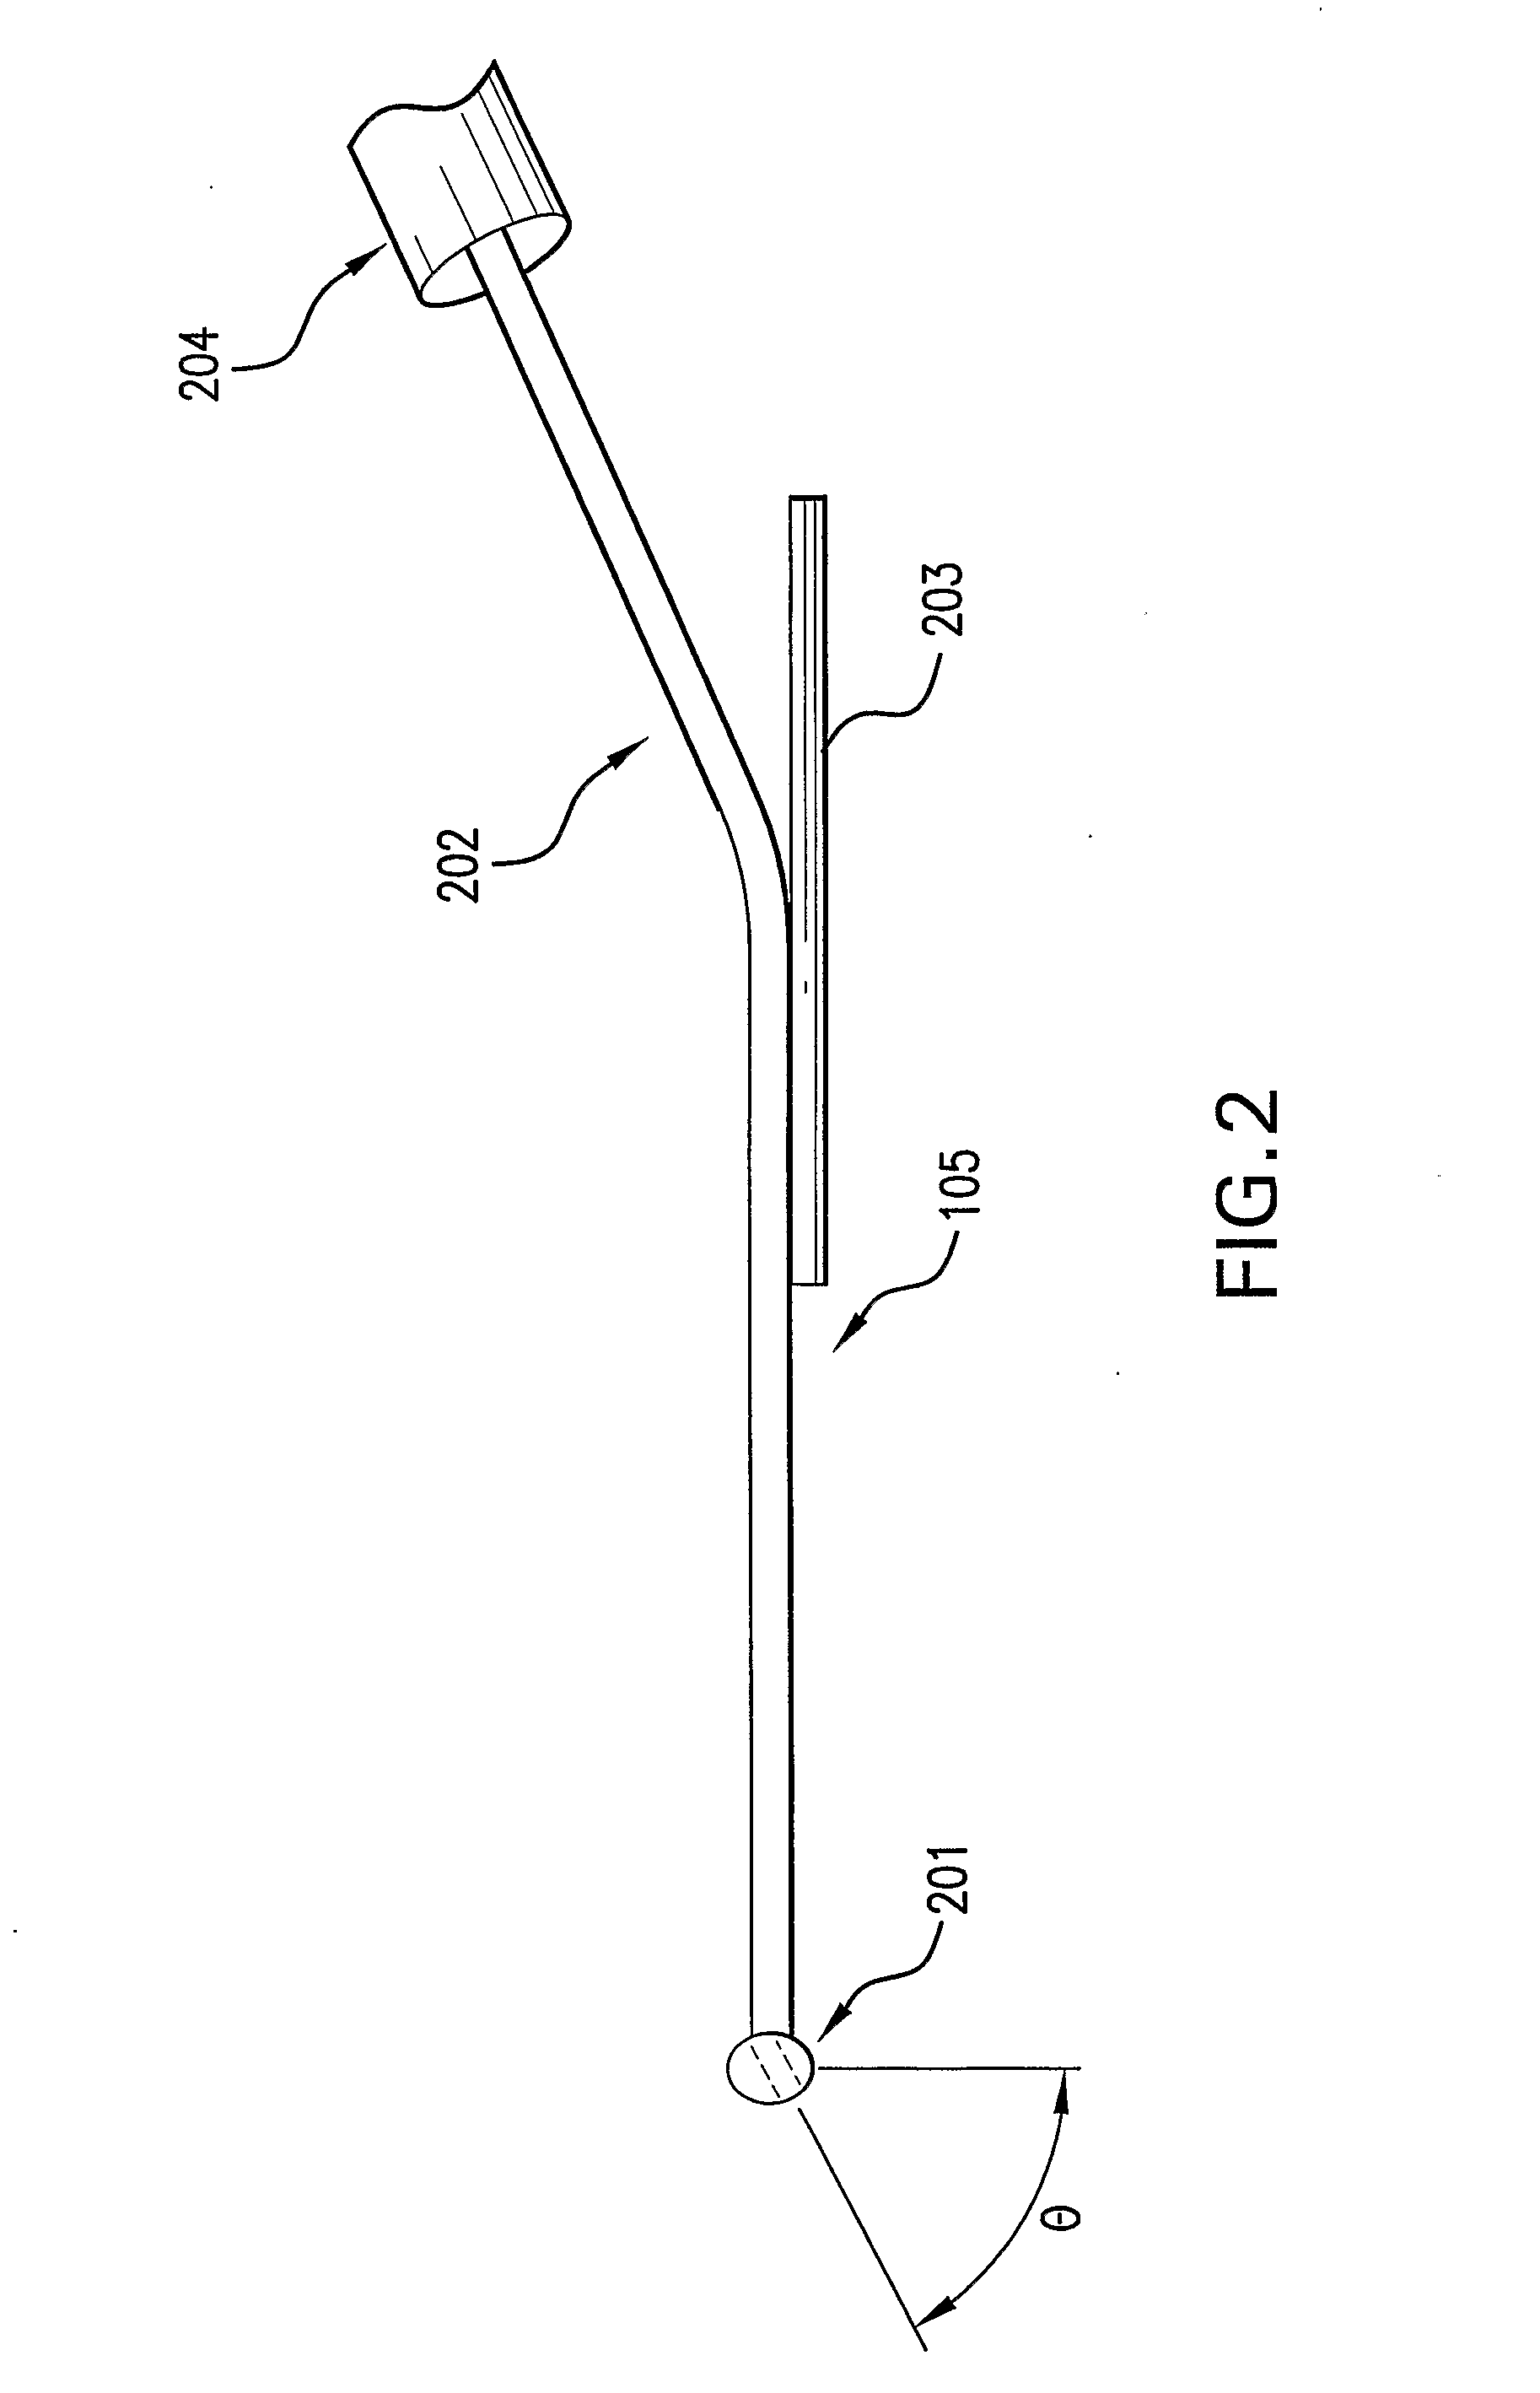 Method and Apparatus for Automatically Isolating Microbial Species